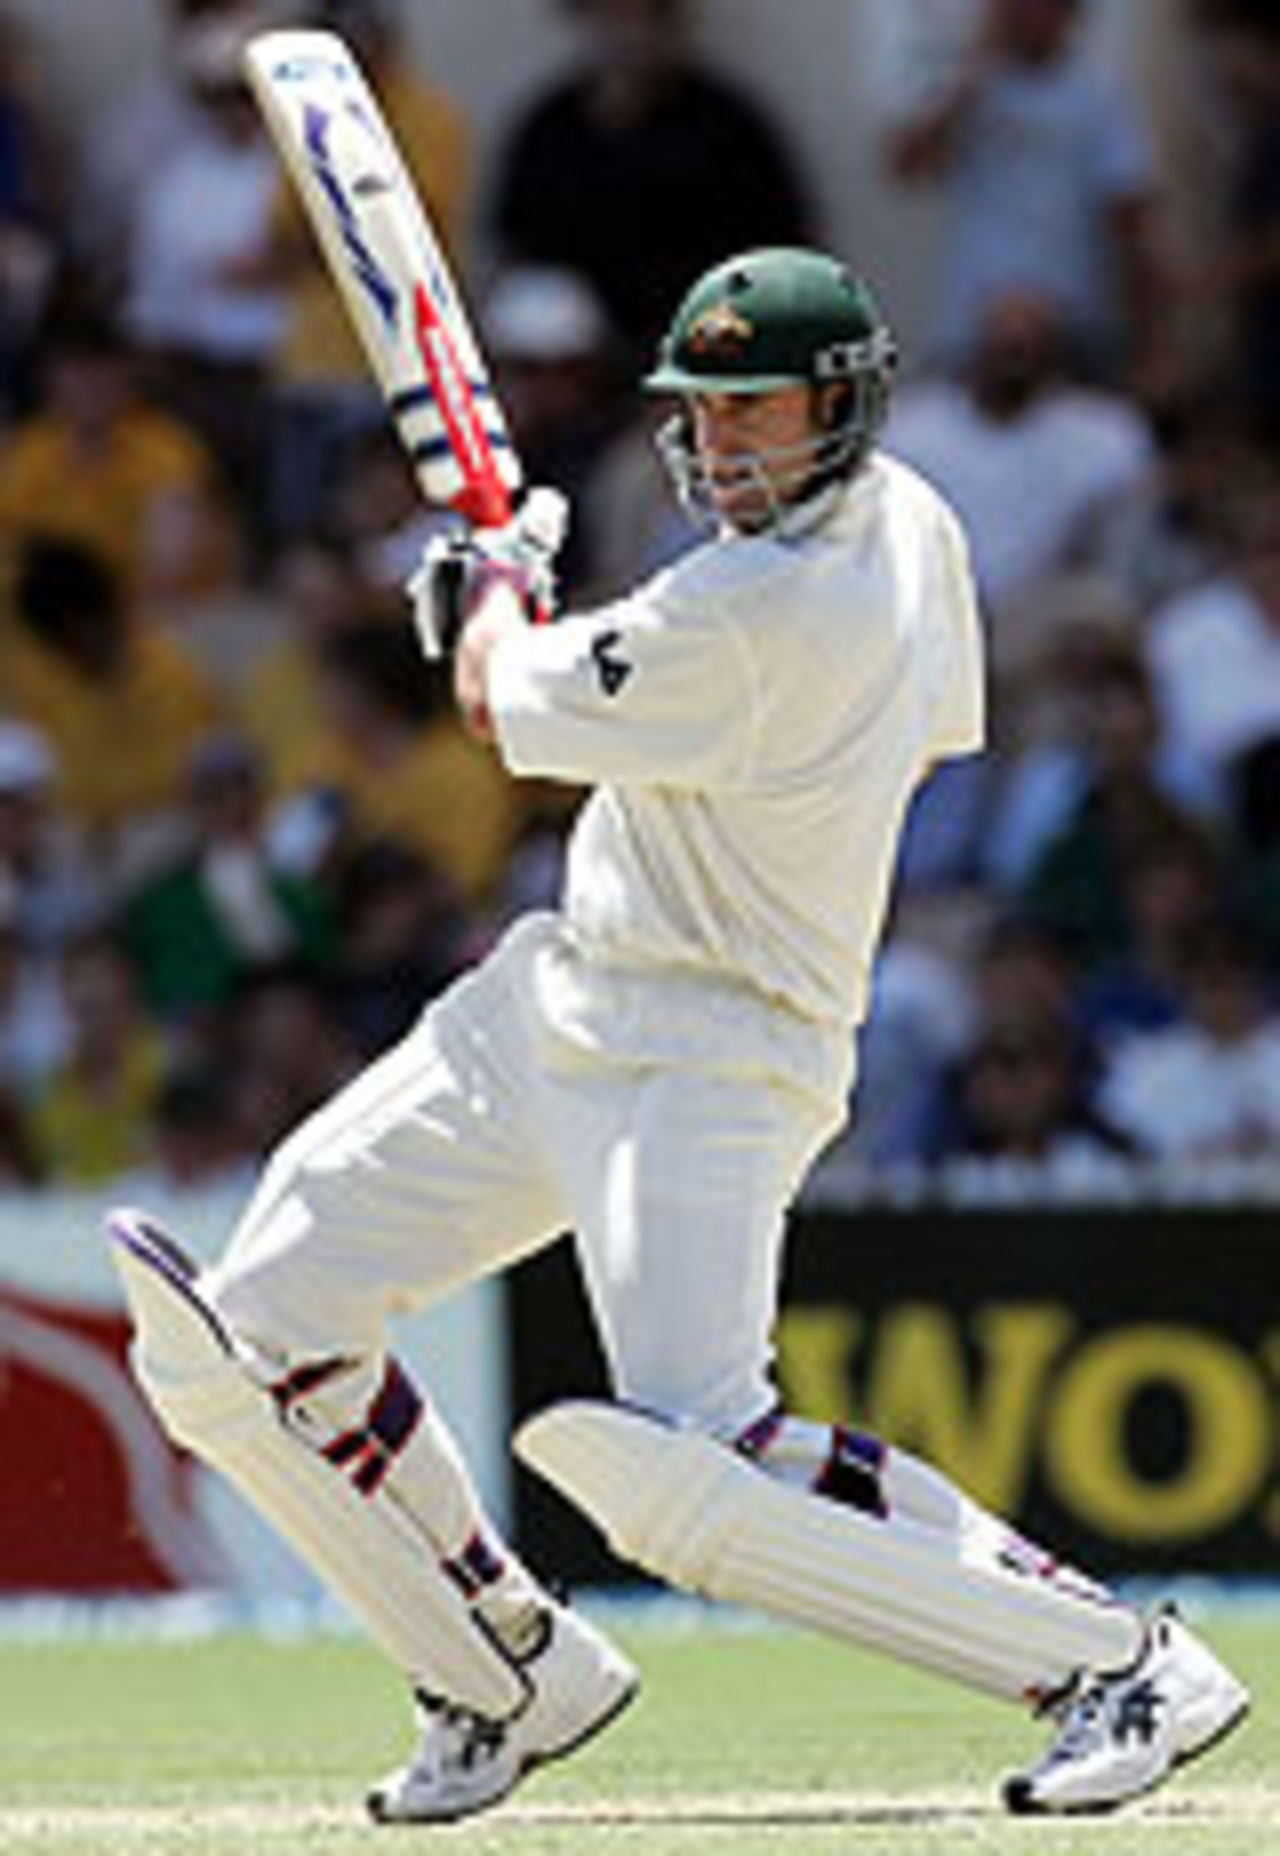 Matthew Hayden carves through the off side, during the second Test against New Zealand, Adelaide, November 25, 2004